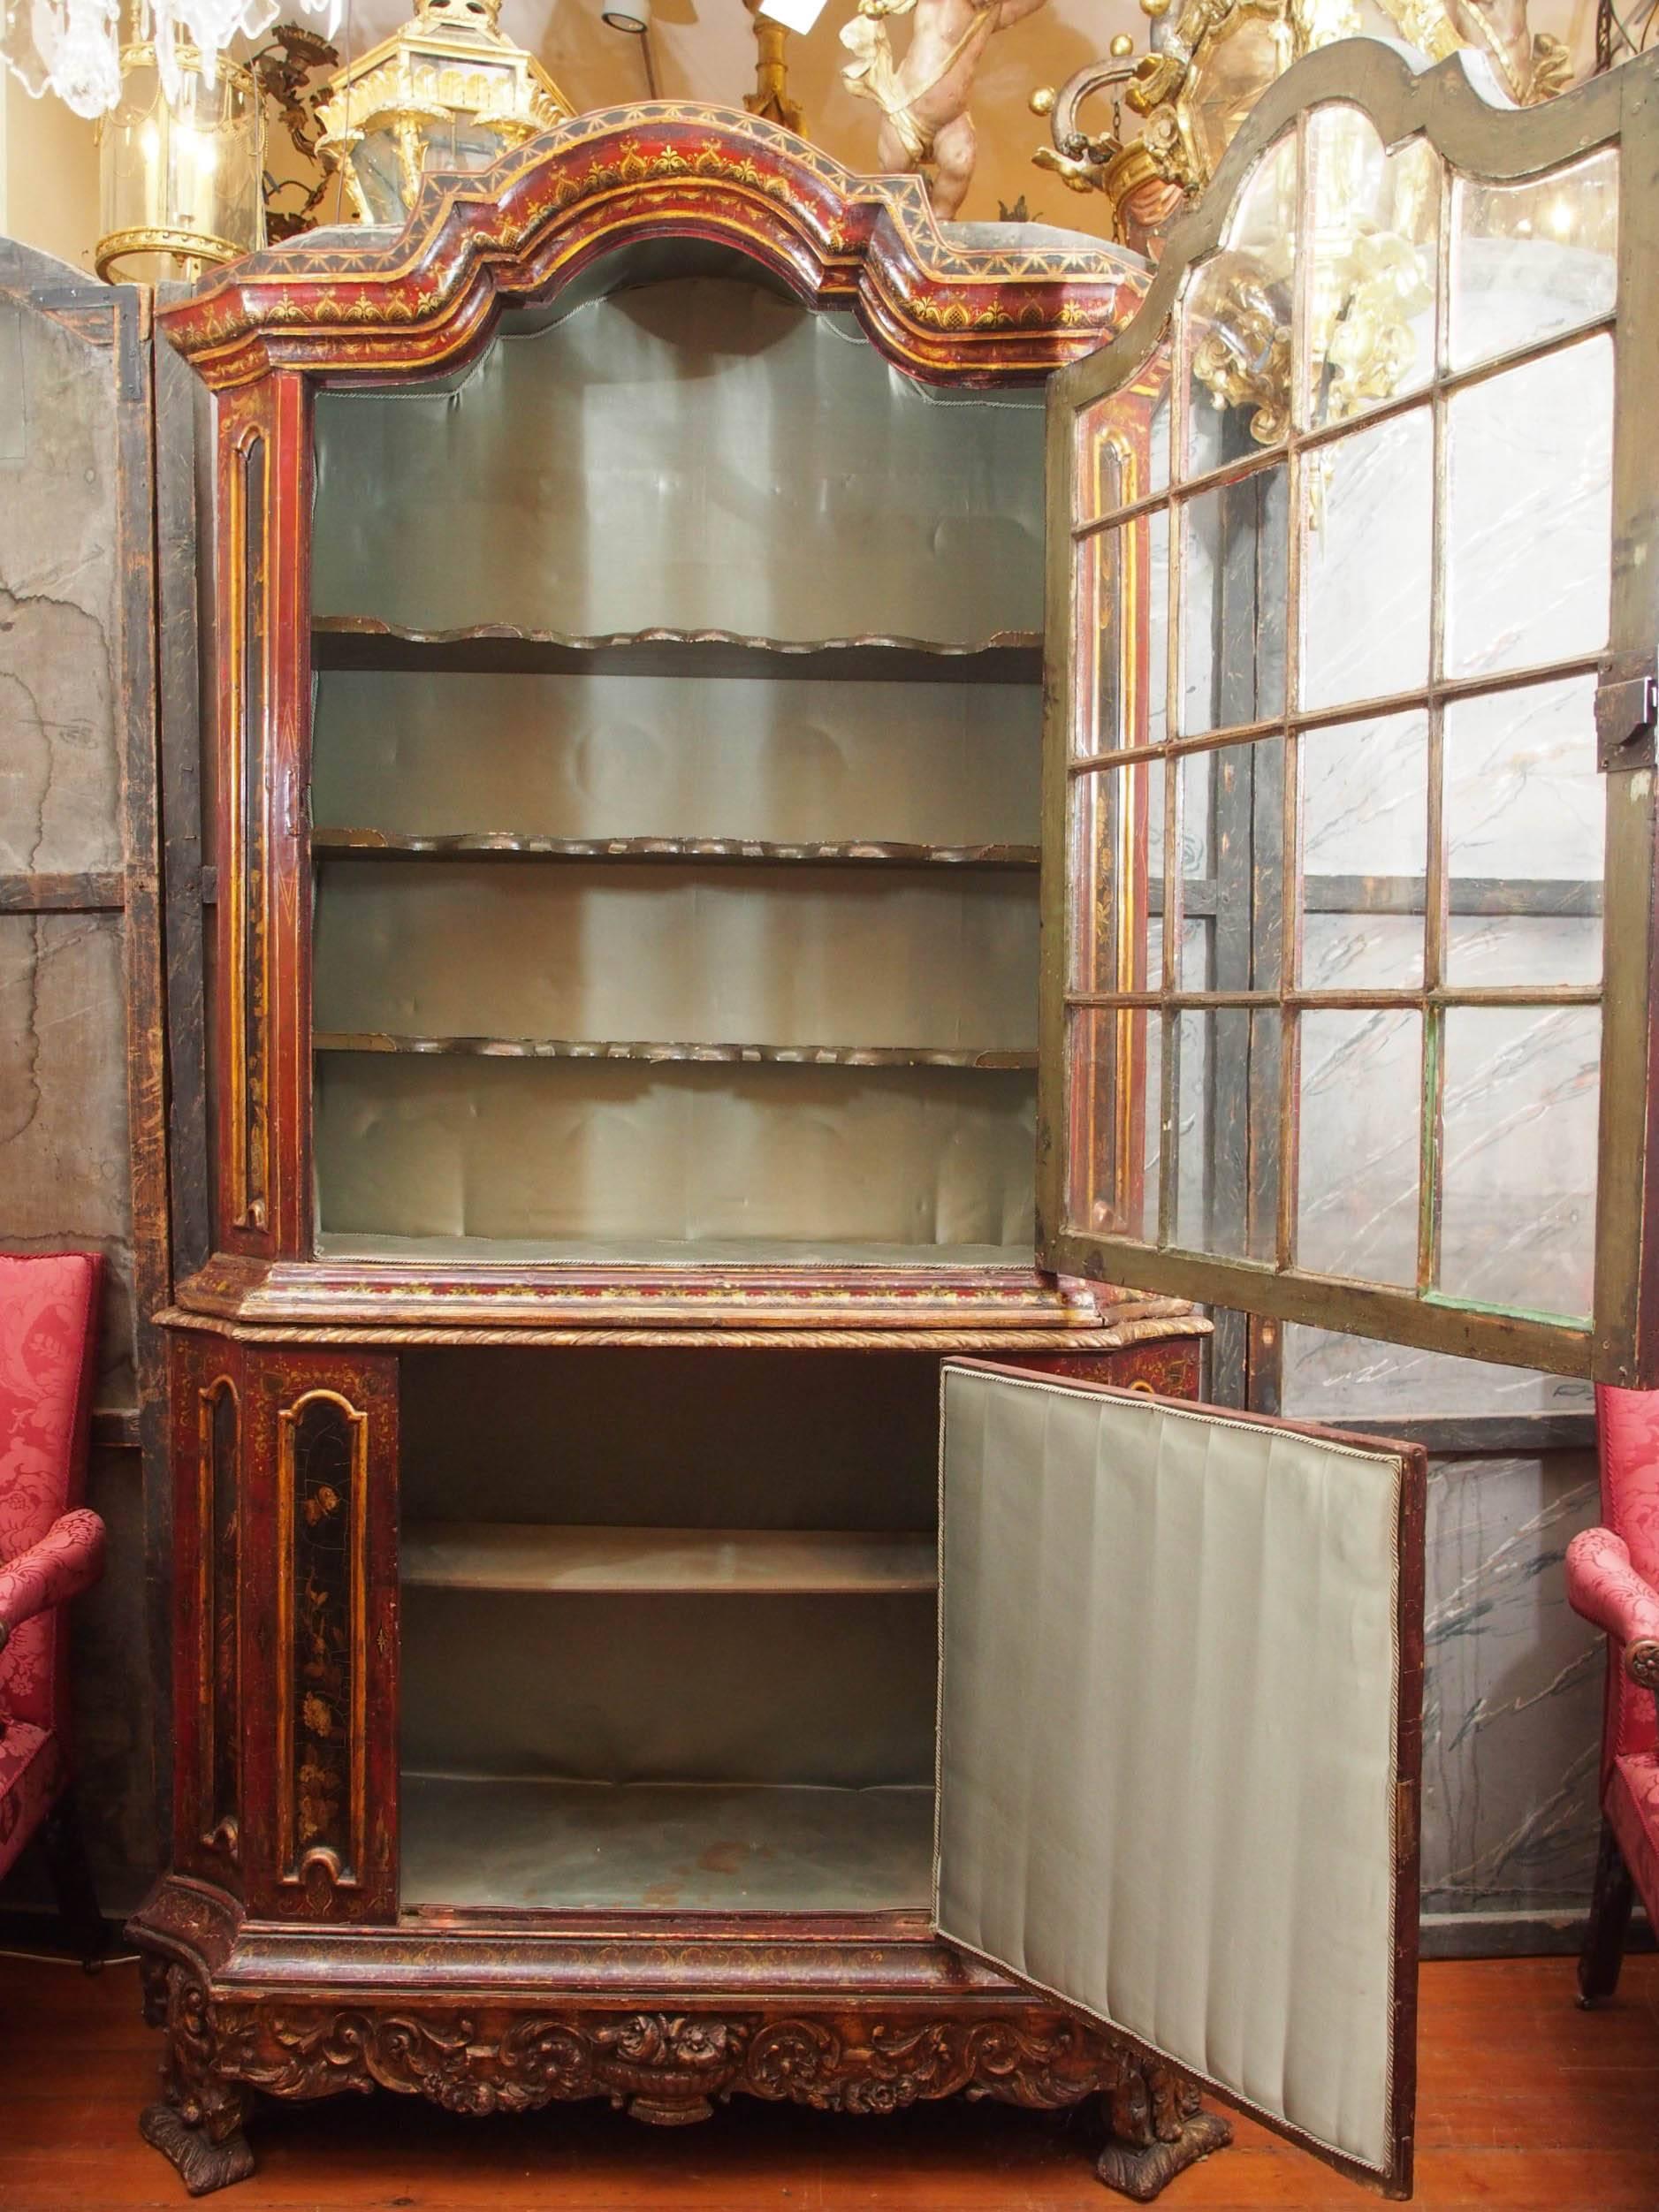 18th century bonnet topped chinoiserie decorated cabinet with astragal glass door and solid panel door beneath.